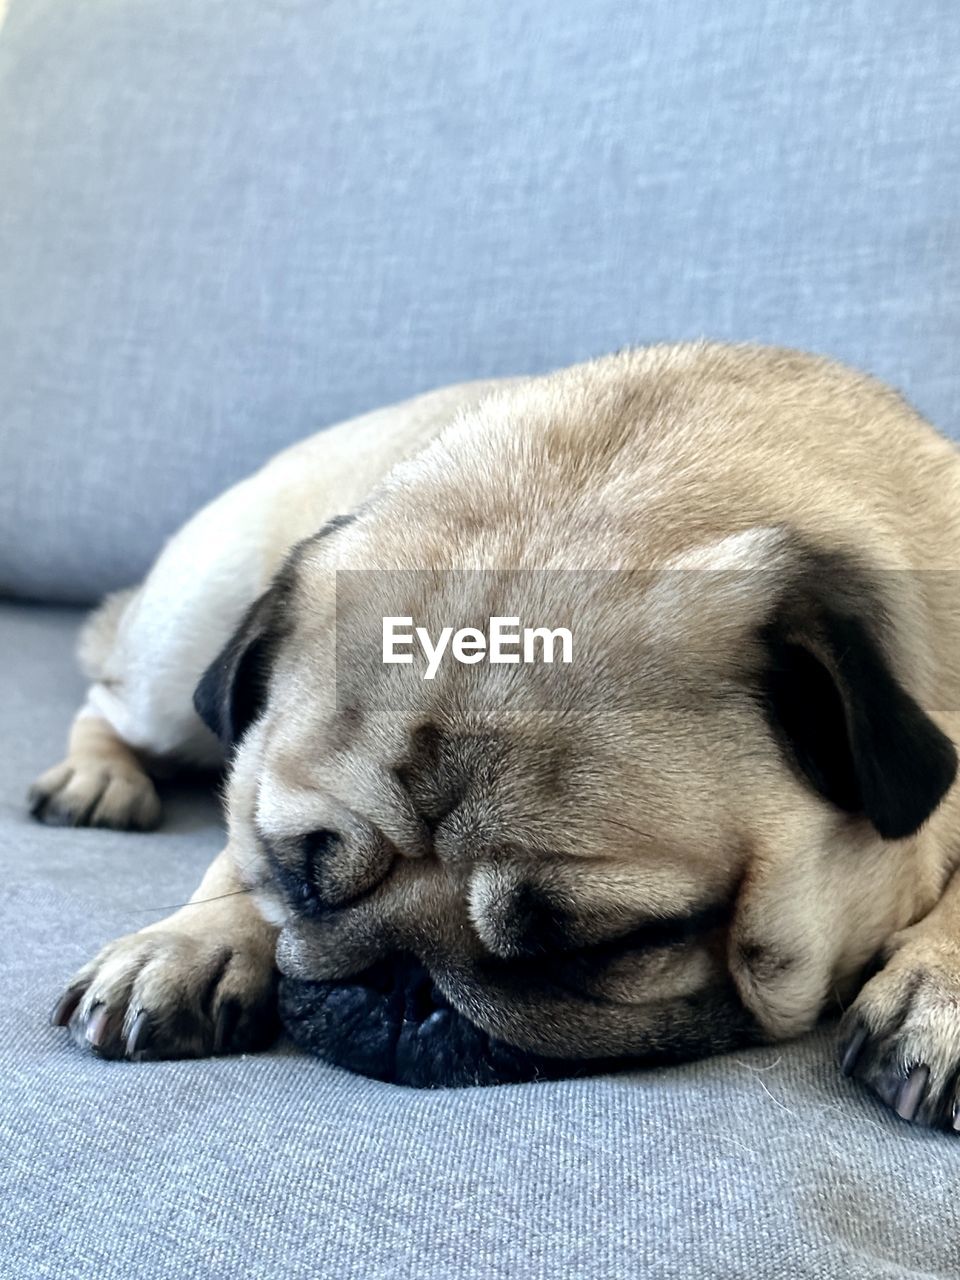 pet, animal themes, animal, dog, one animal, mammal, canine, domestic animals, pug, relaxation, sleeping, puppy, resting, eyes closed, no people, lap dog, carnivore, lying down, young animal, indoors, tired, cute, furniture, snout